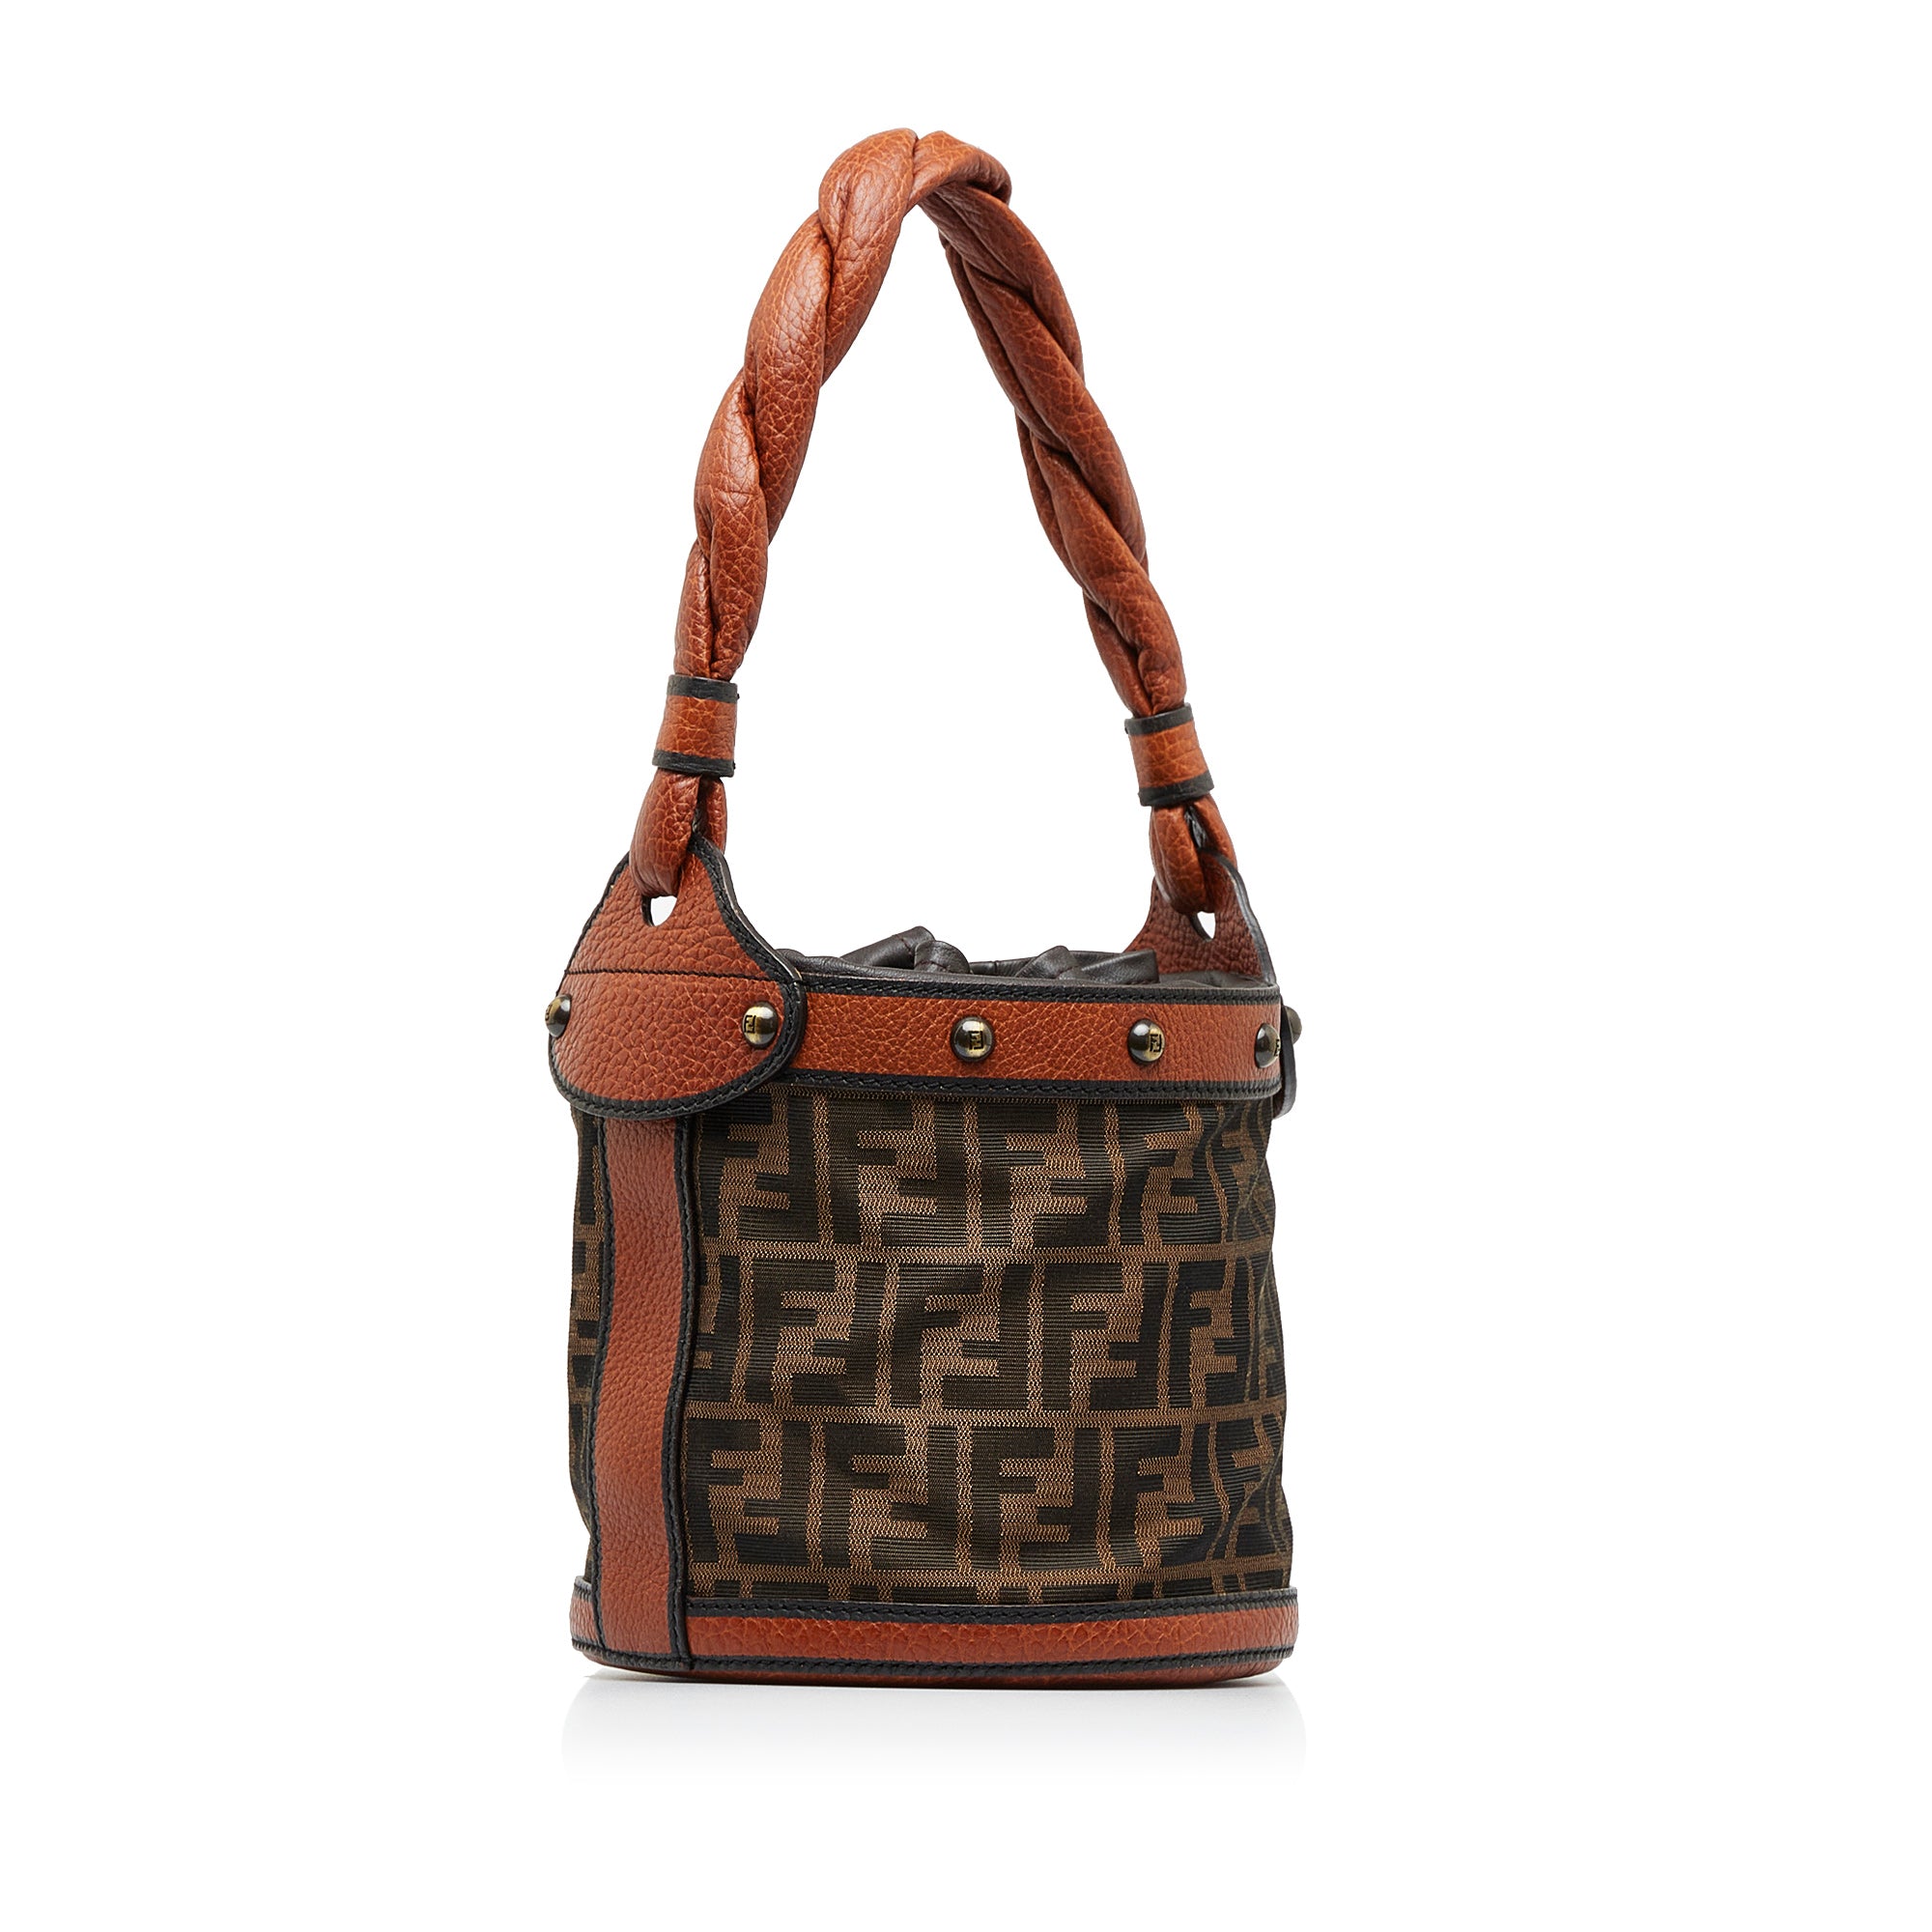 Fendi - Authenticated Baguette Handbag - Cloth Brown for Women, Very Good Condition